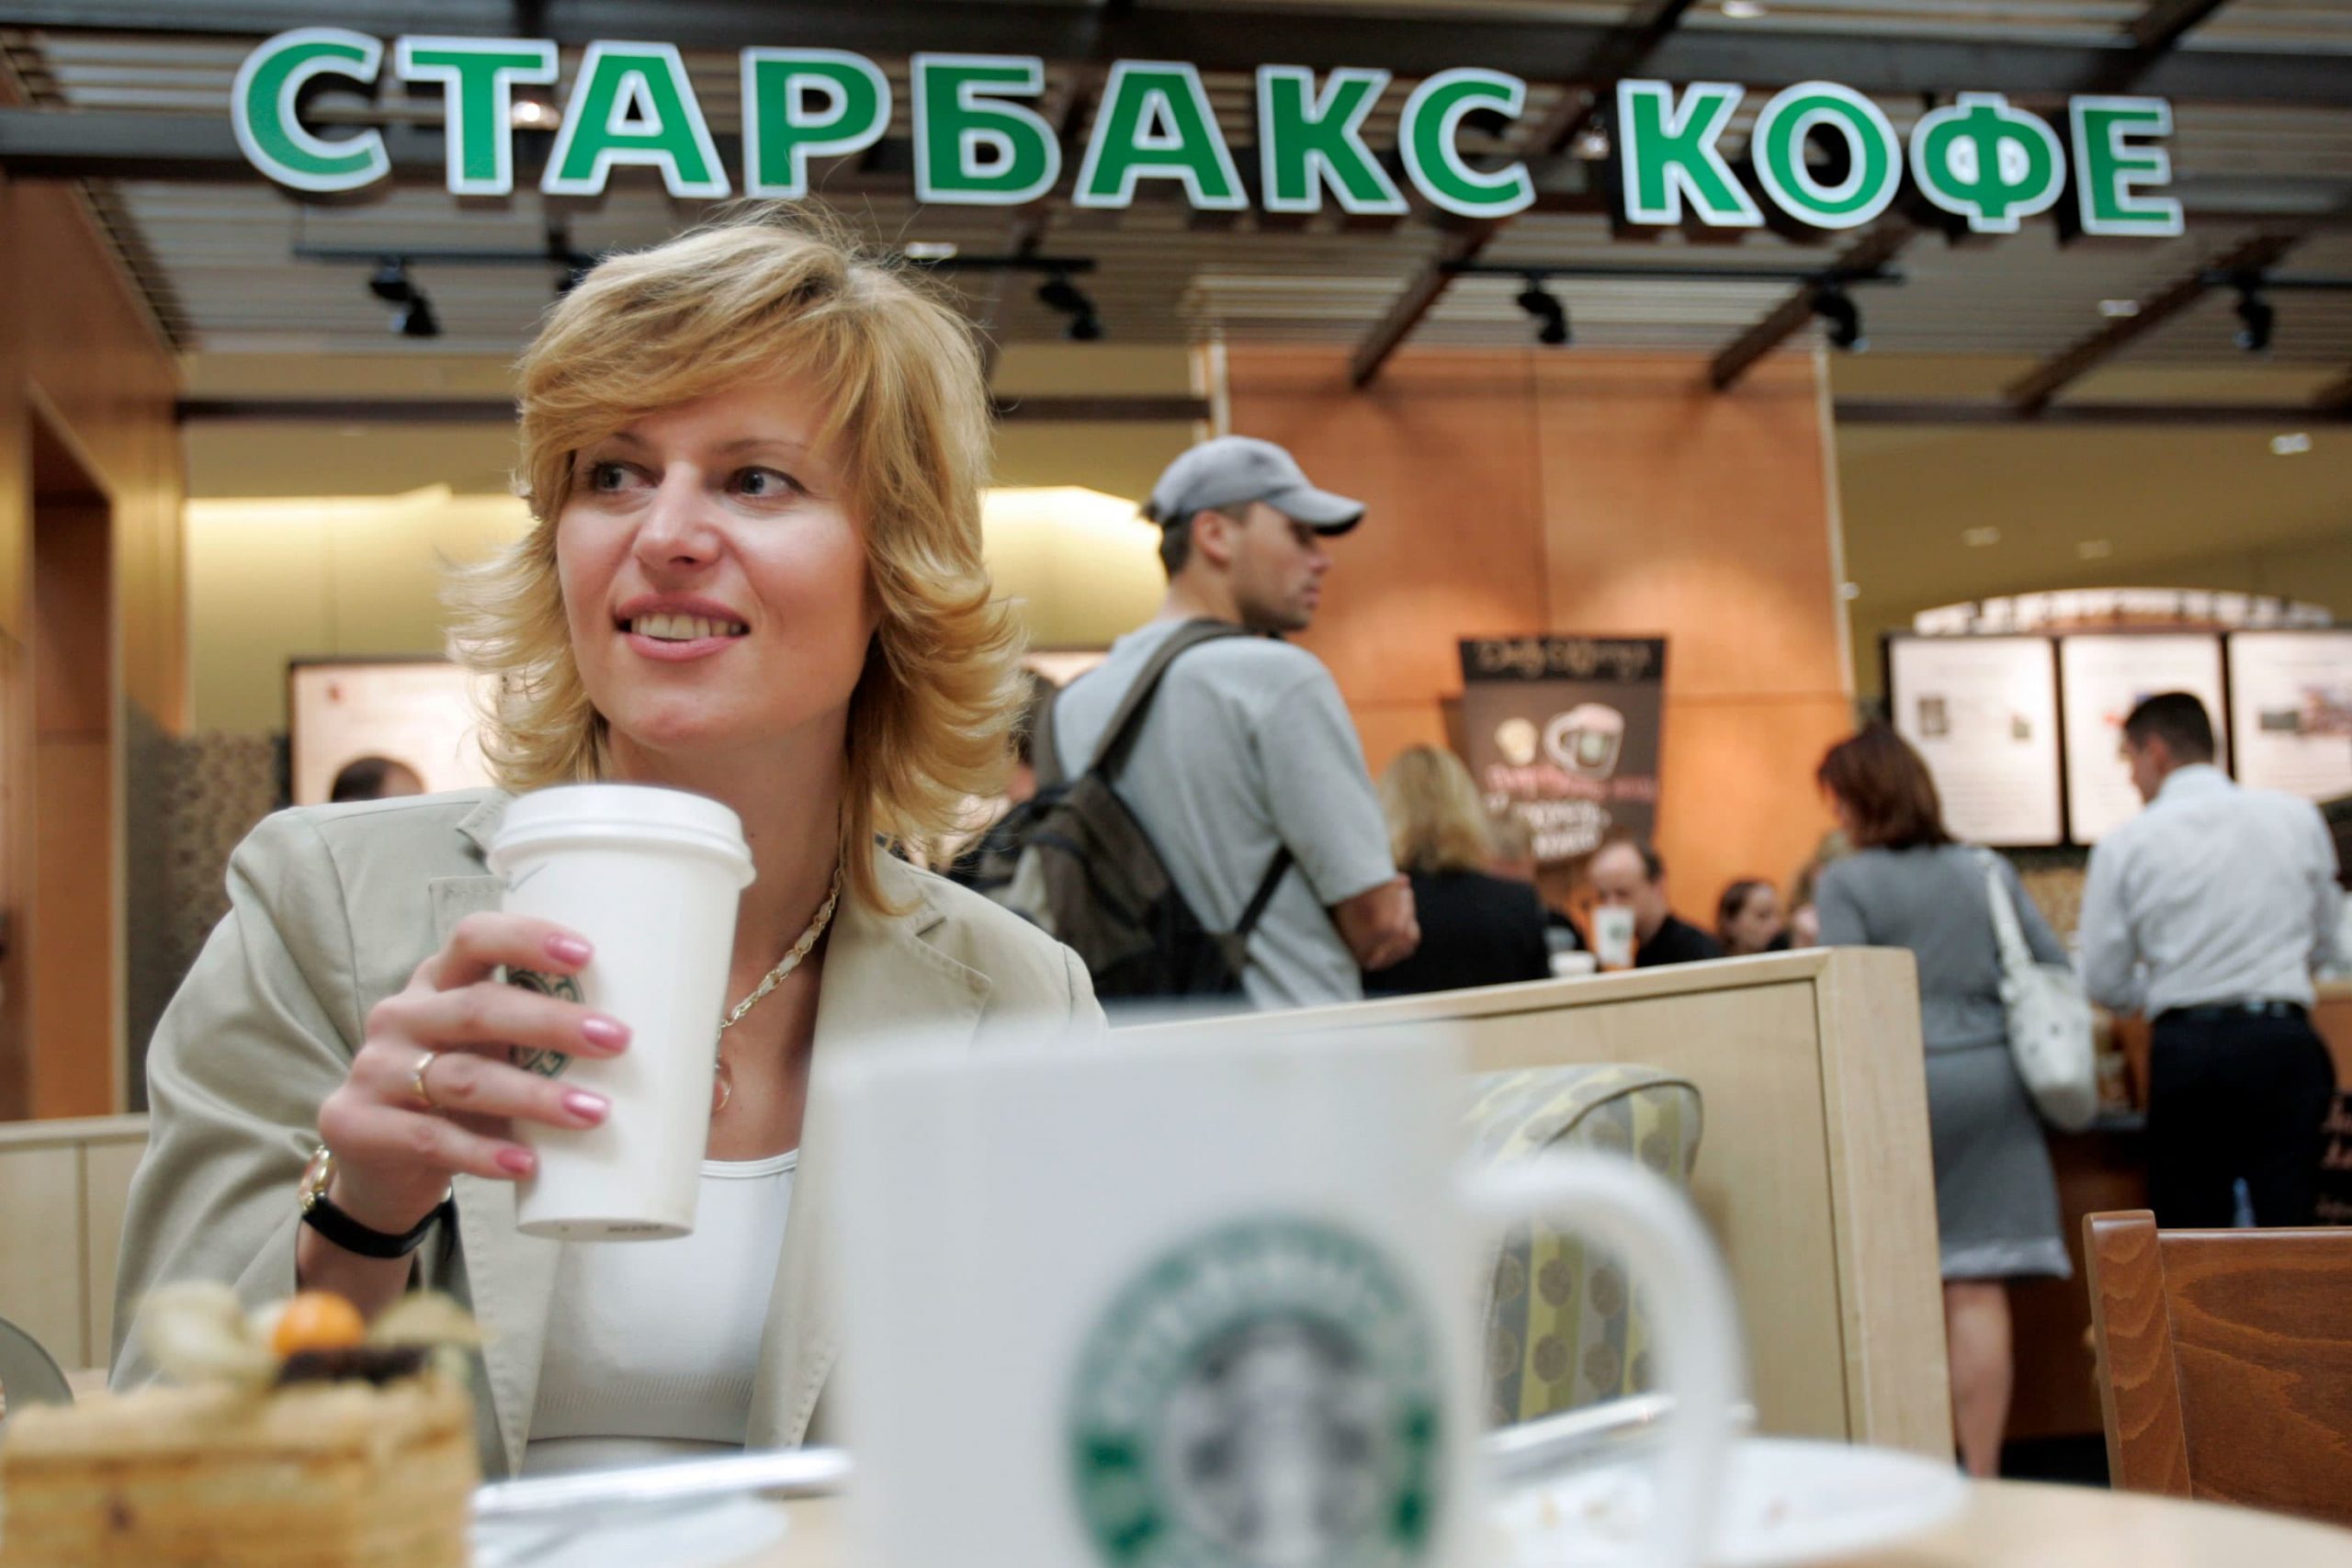 Starbucks suspends all business in Russia as Putin’s forces attack Ukraine